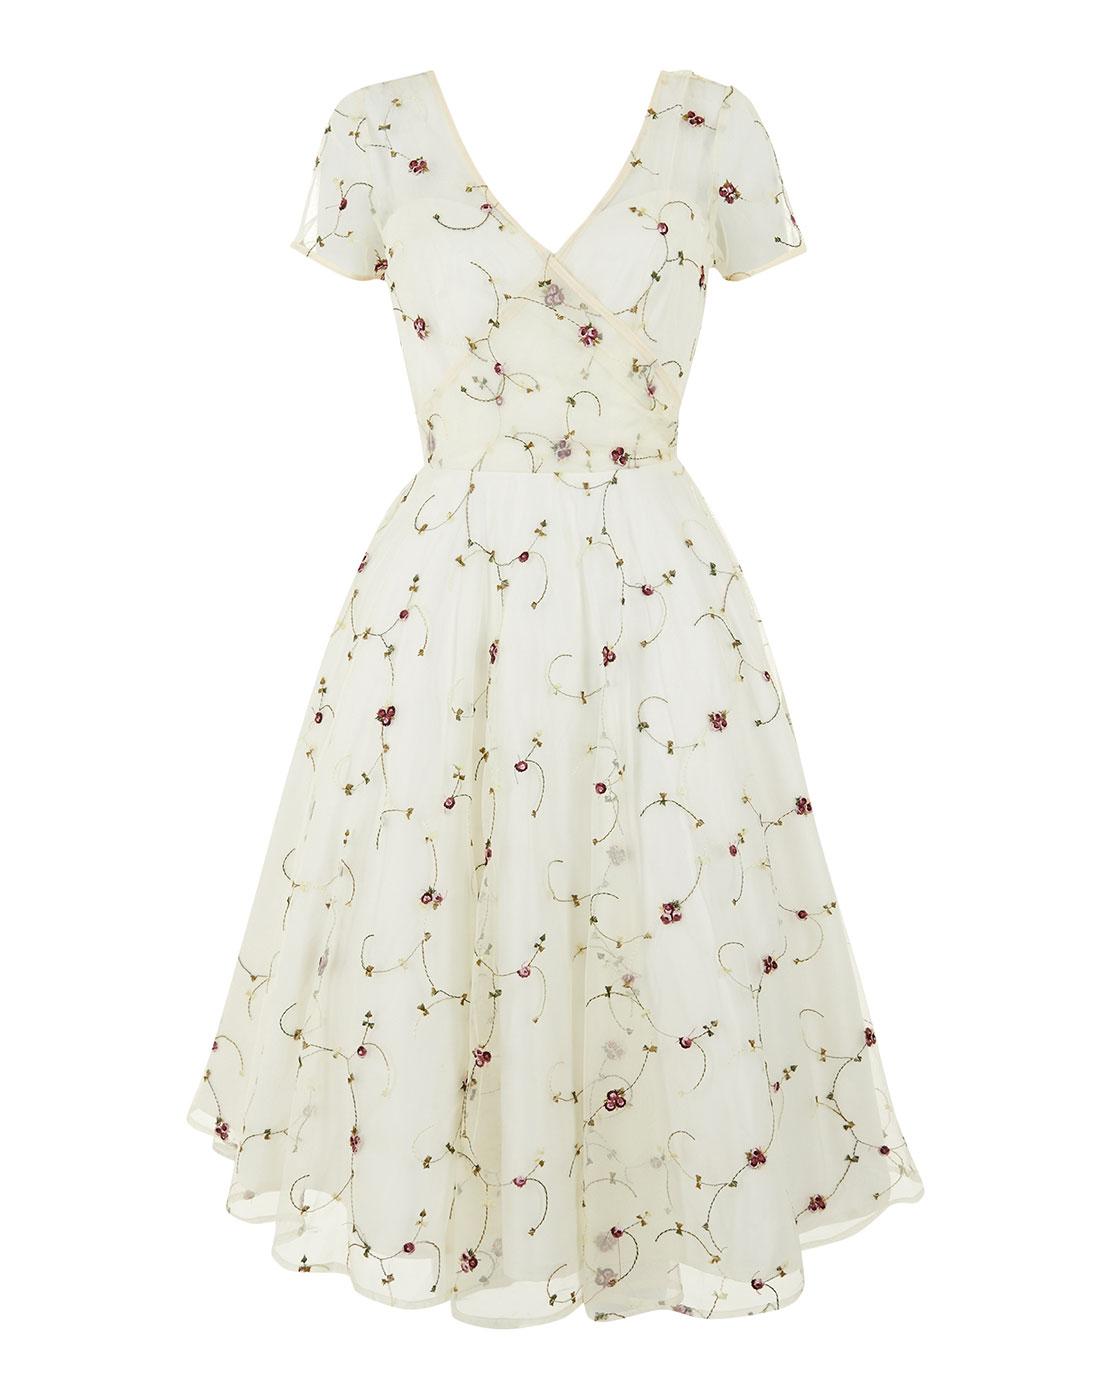 COLLECTIF Nina Floral Embroidered Swing Dress in Ivory